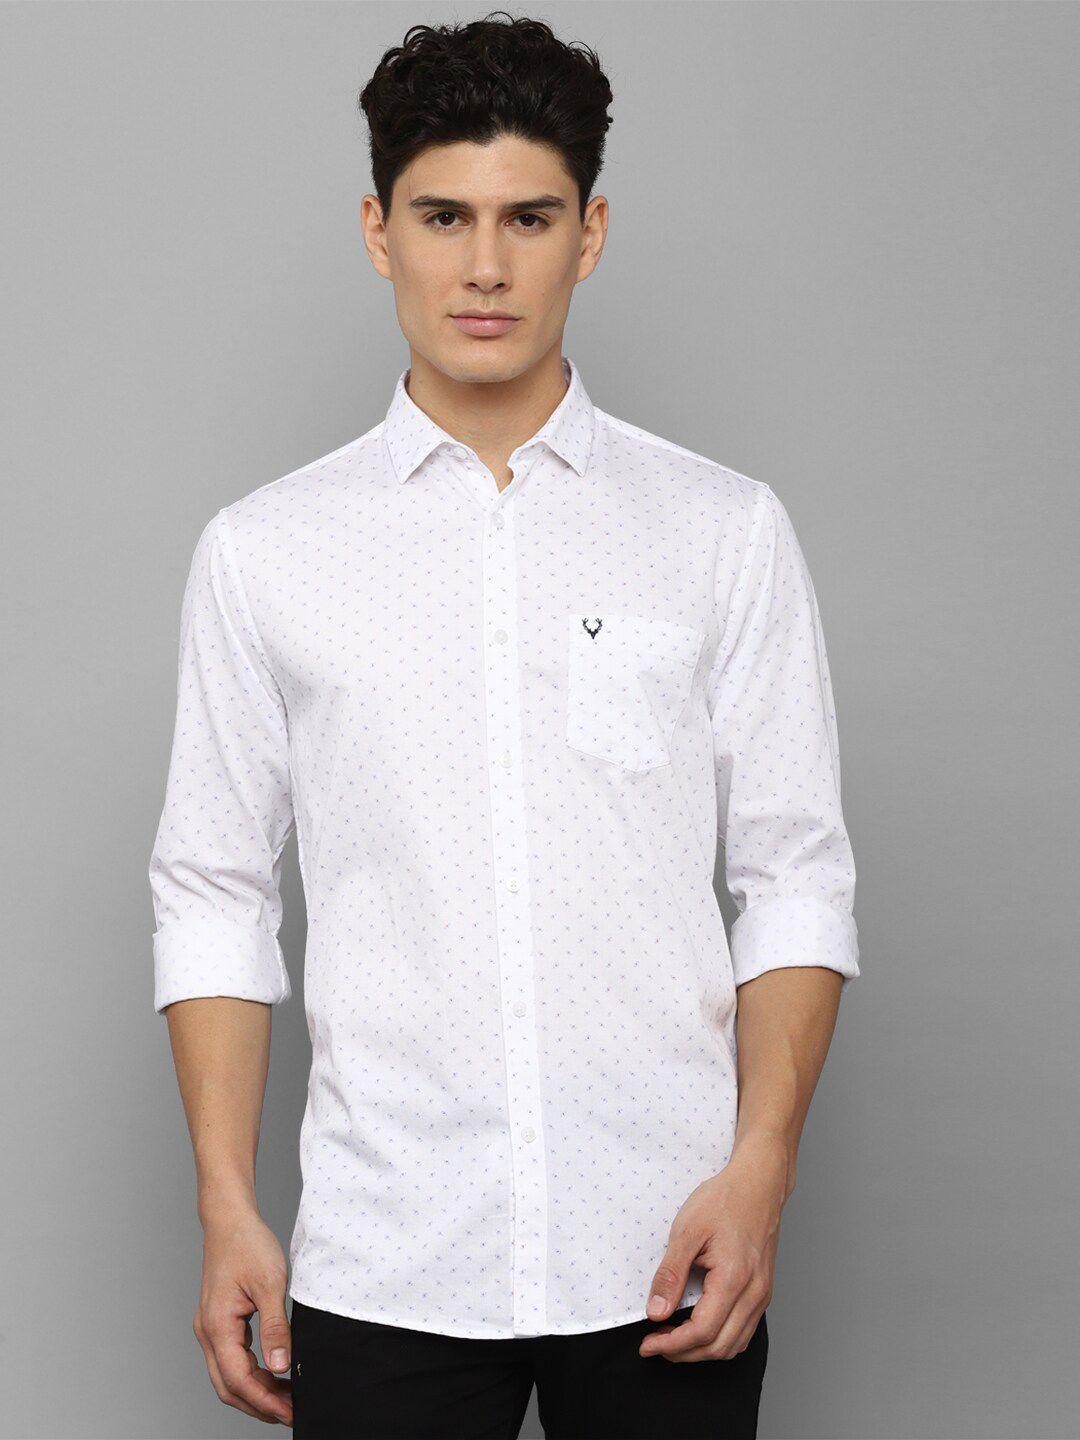 allen solly men white cotton standard slim fit printed casual shirt